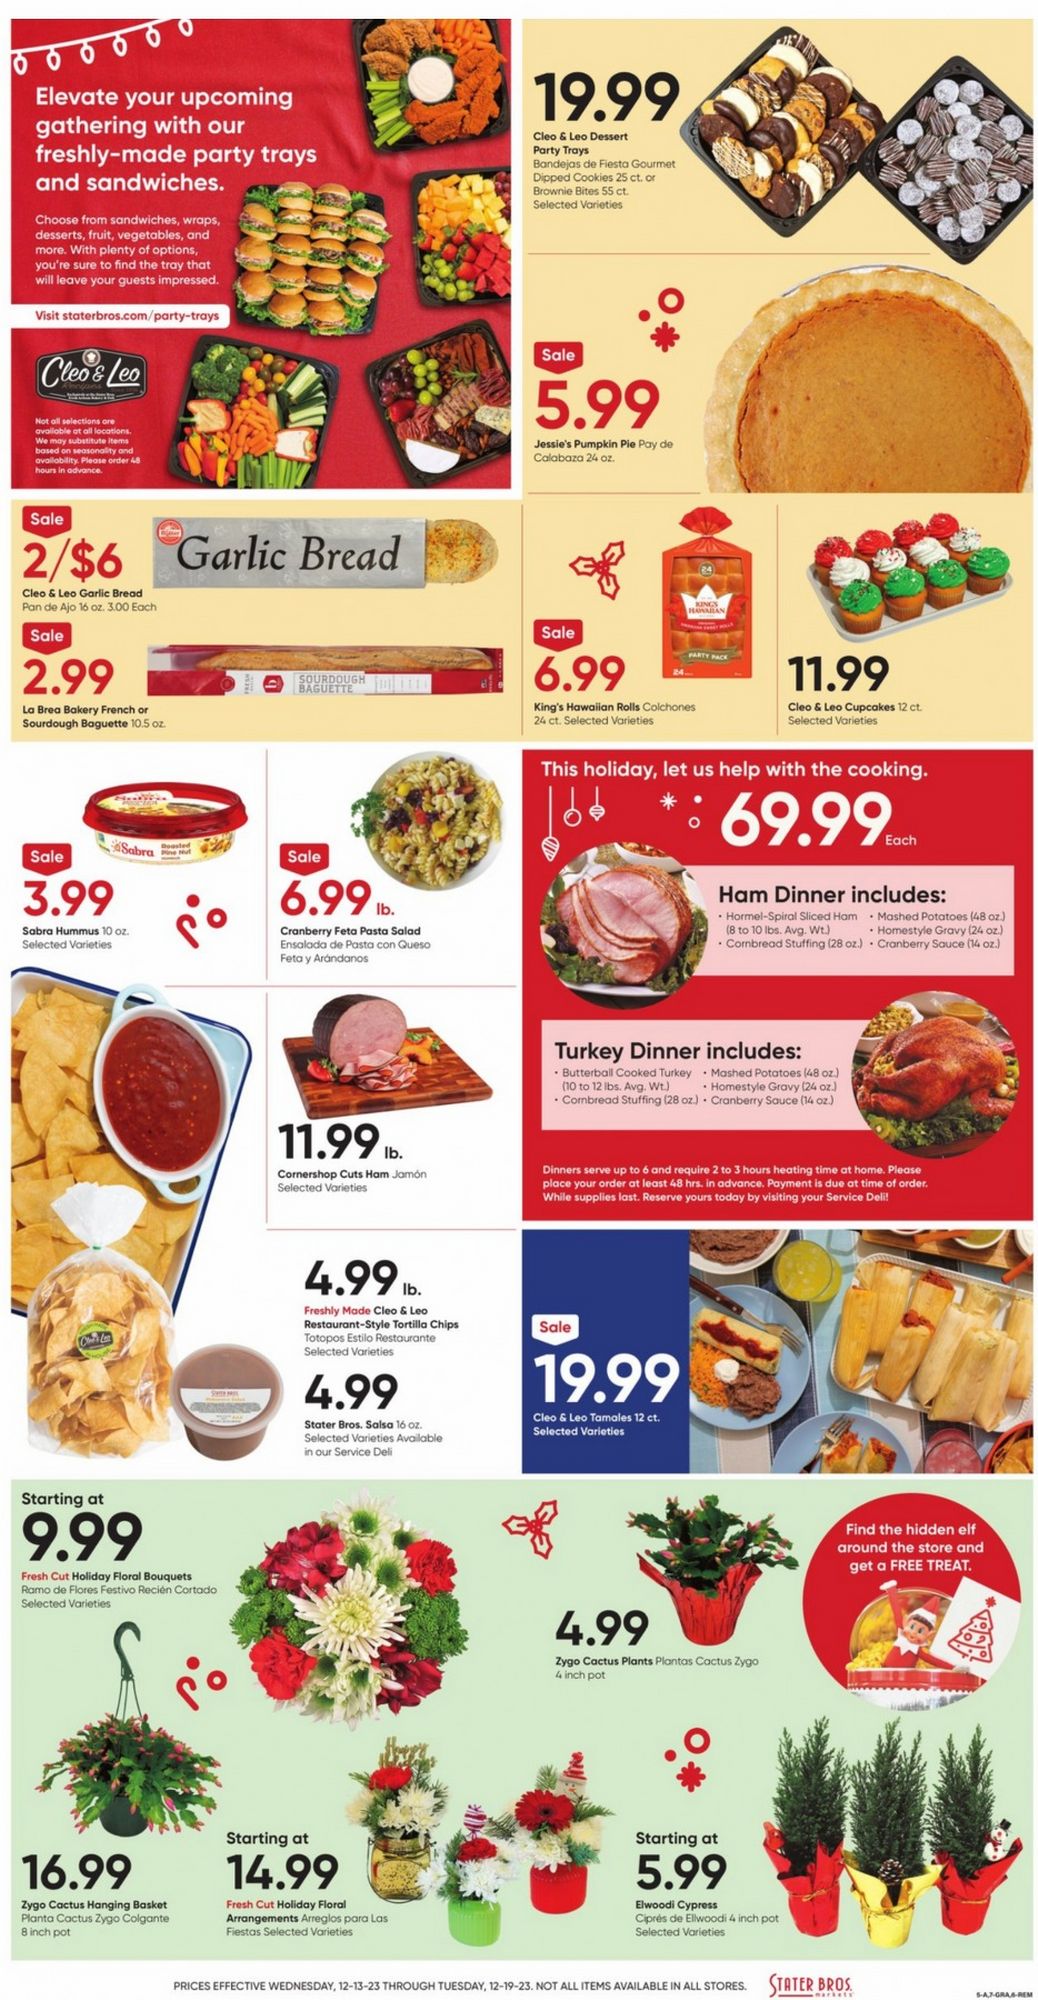 Stater Bros Christmas July 2024 Weekly Sales, Deals, Discounts and Digital Coupons.